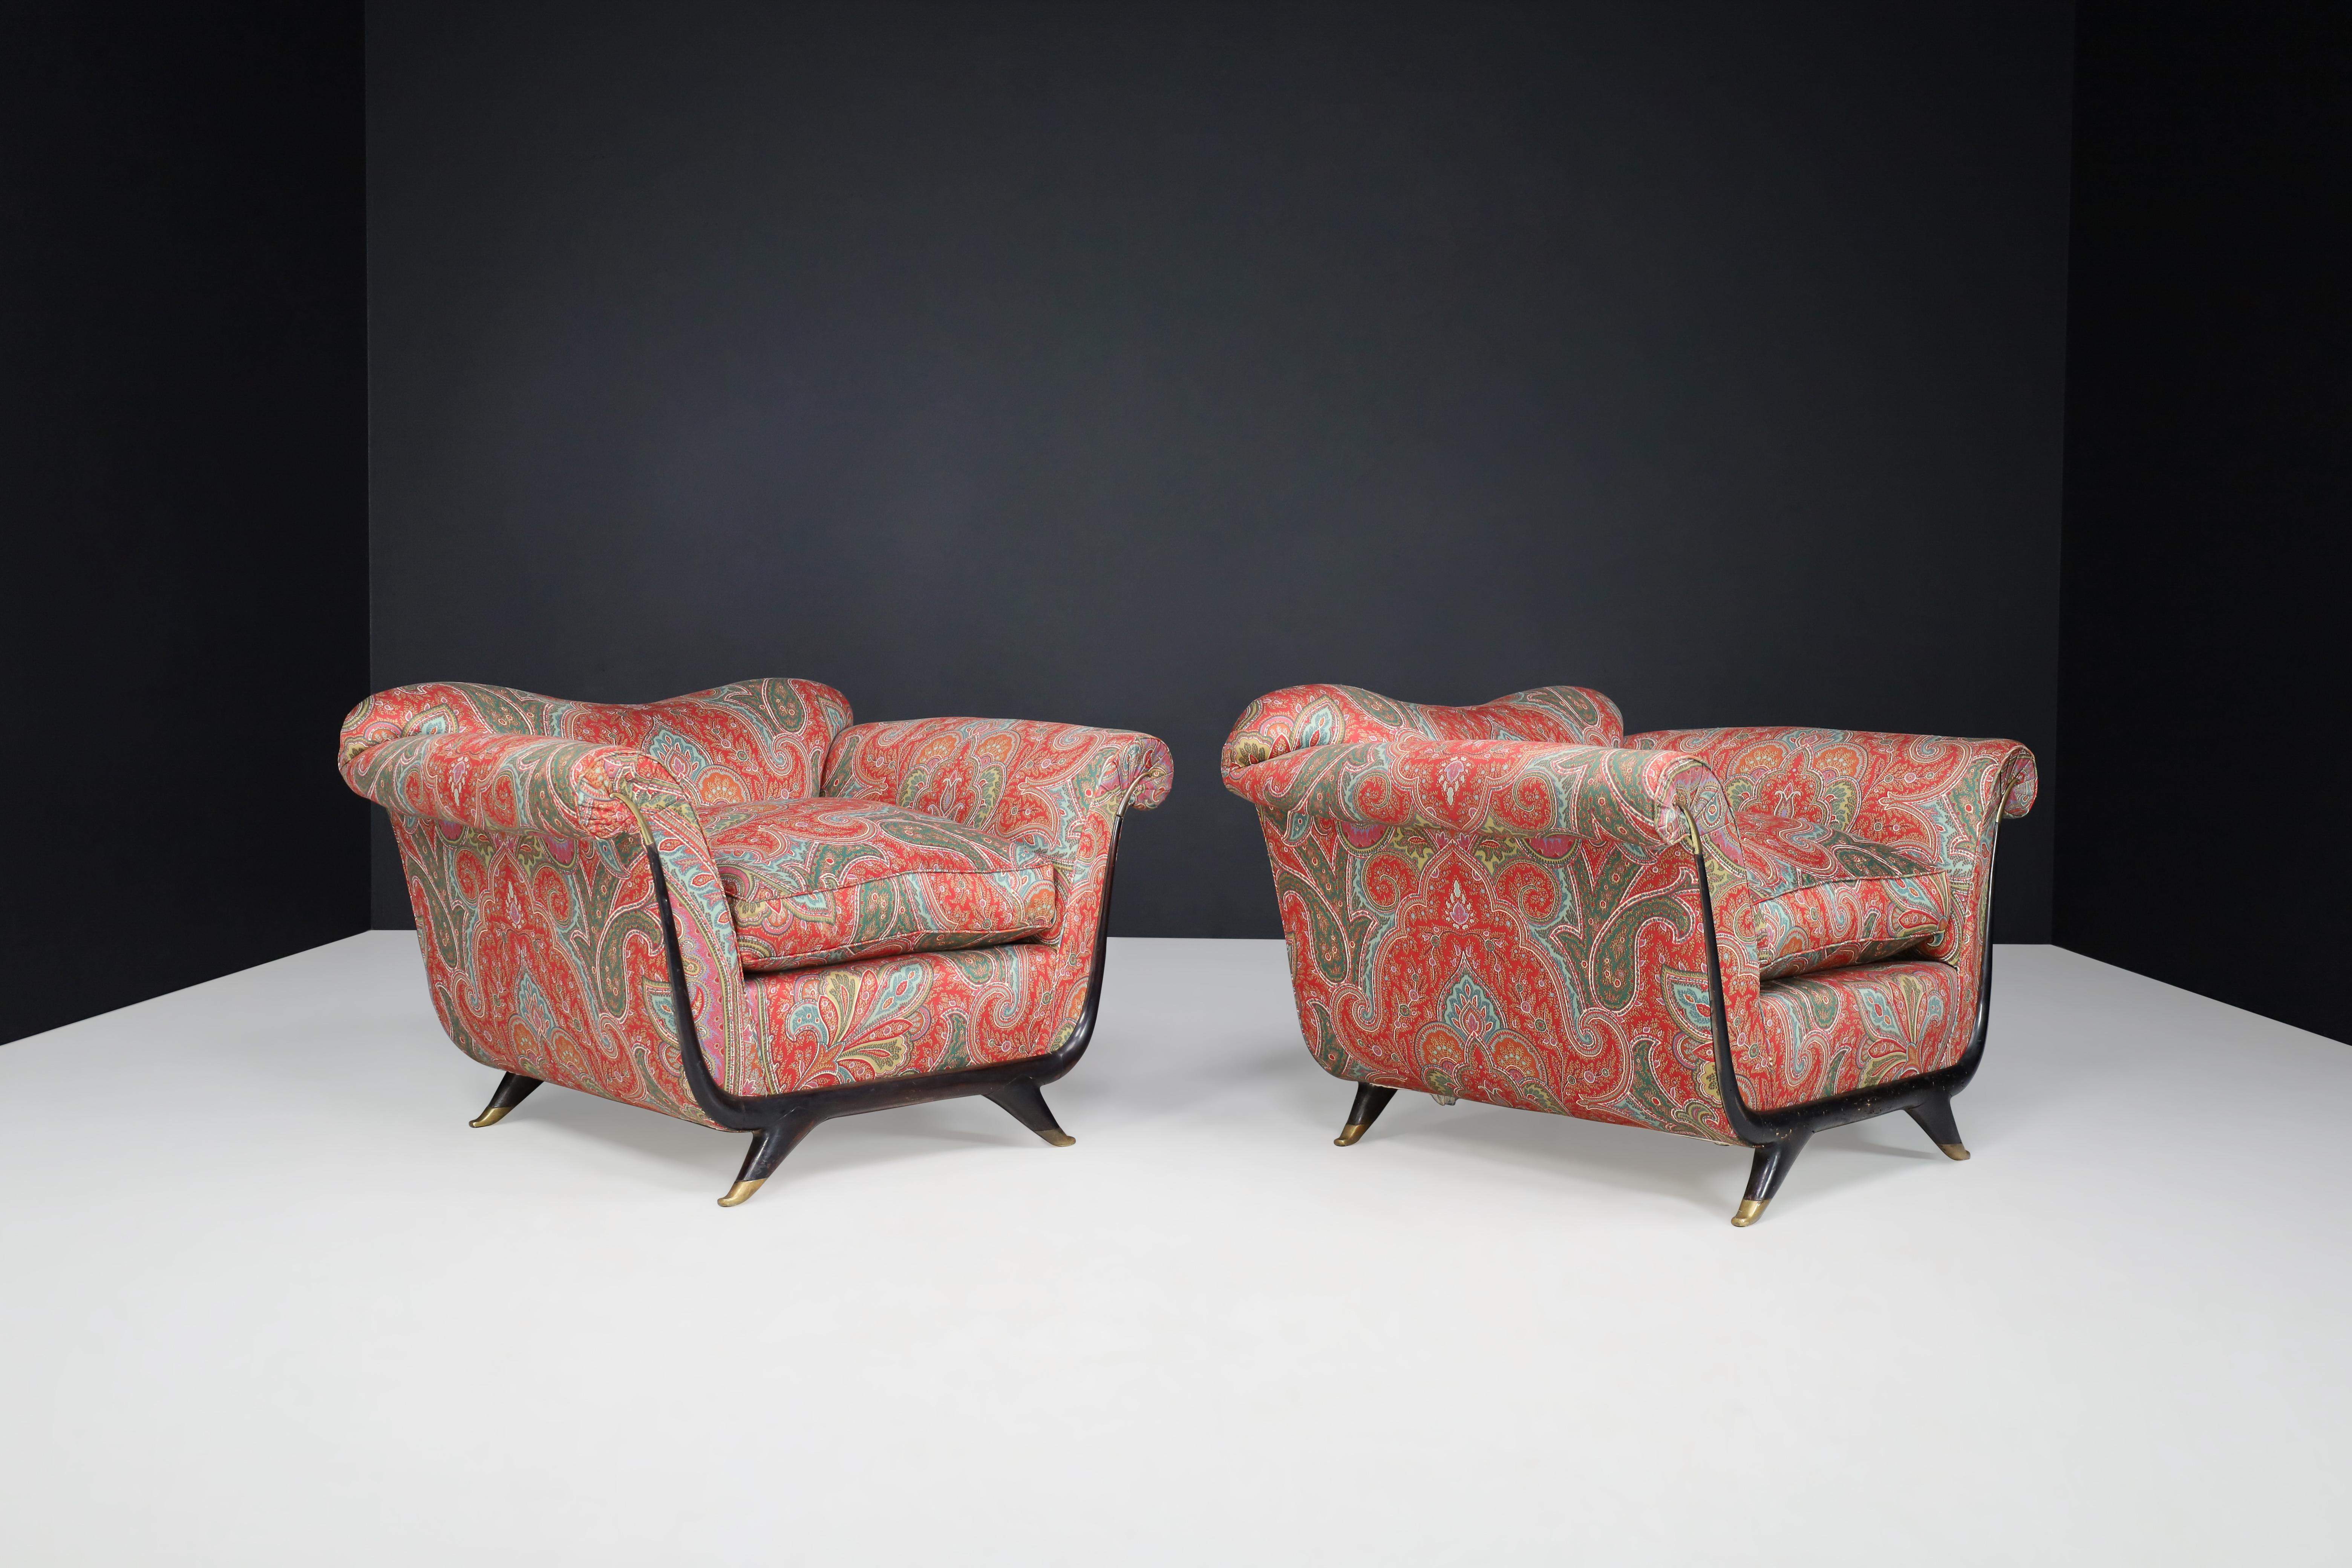 Guglielmo Ulrich Lounge Chairs in Walnut, Fabric, and Brass, Italy, 1930s  For Sale 8